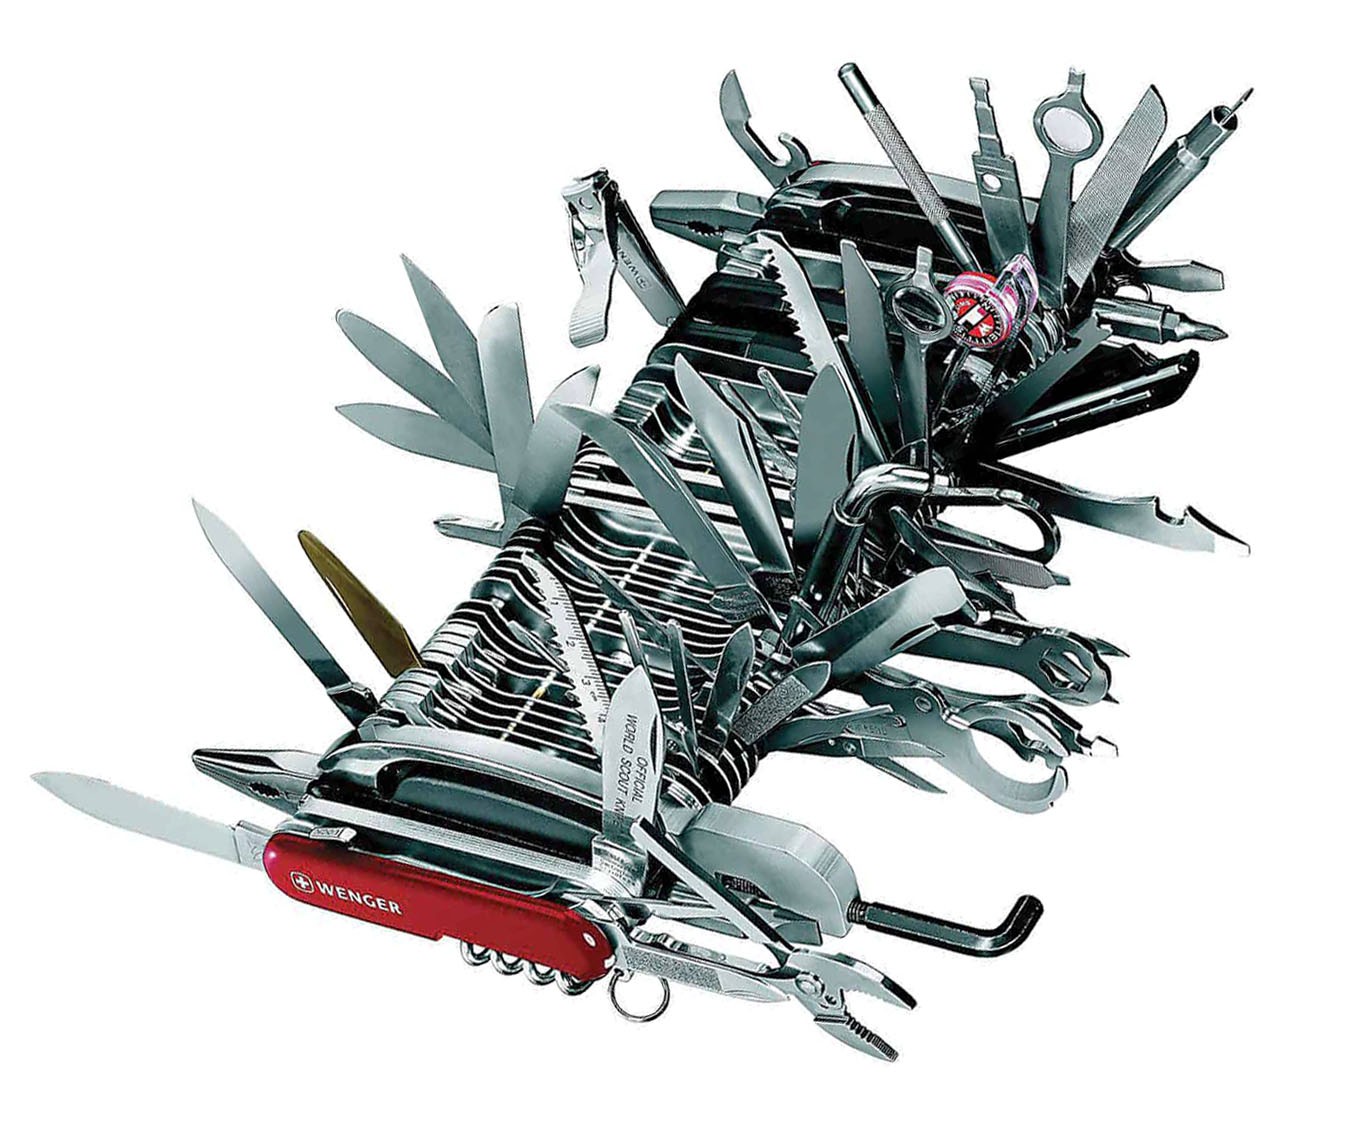 Wenger Largest Swiss Army Knife Army Military